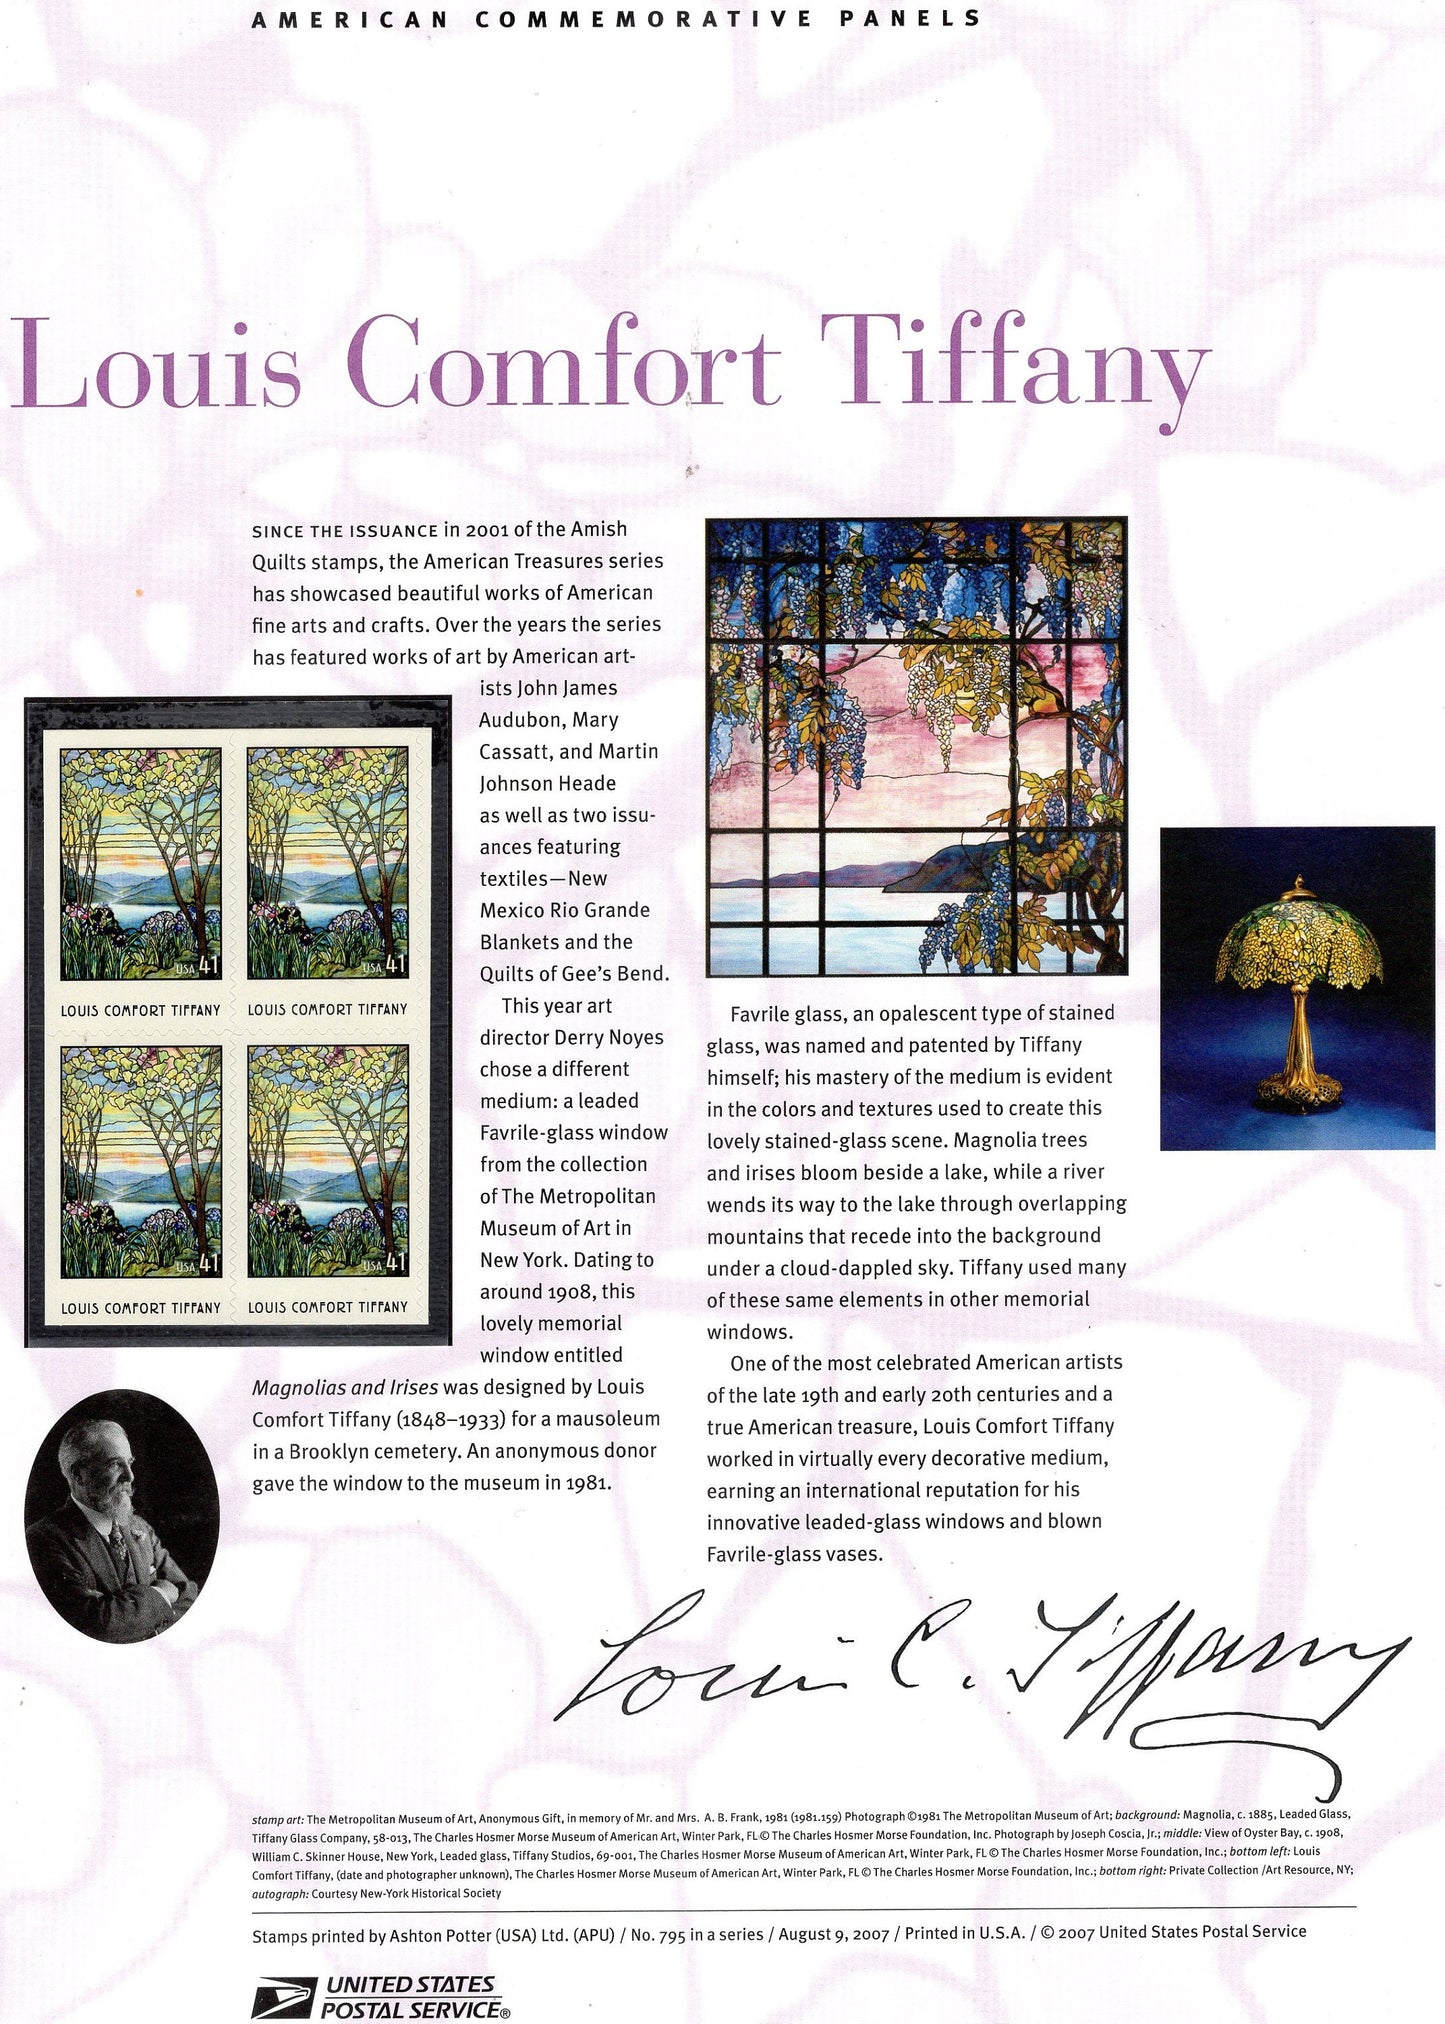 LOUIS COMFORT TIFFANY Stained Favrile Glass Commemorative Panel Stamps + Illustrations plus Text – A Great Gift 8.5x11- Issued in 2007 -